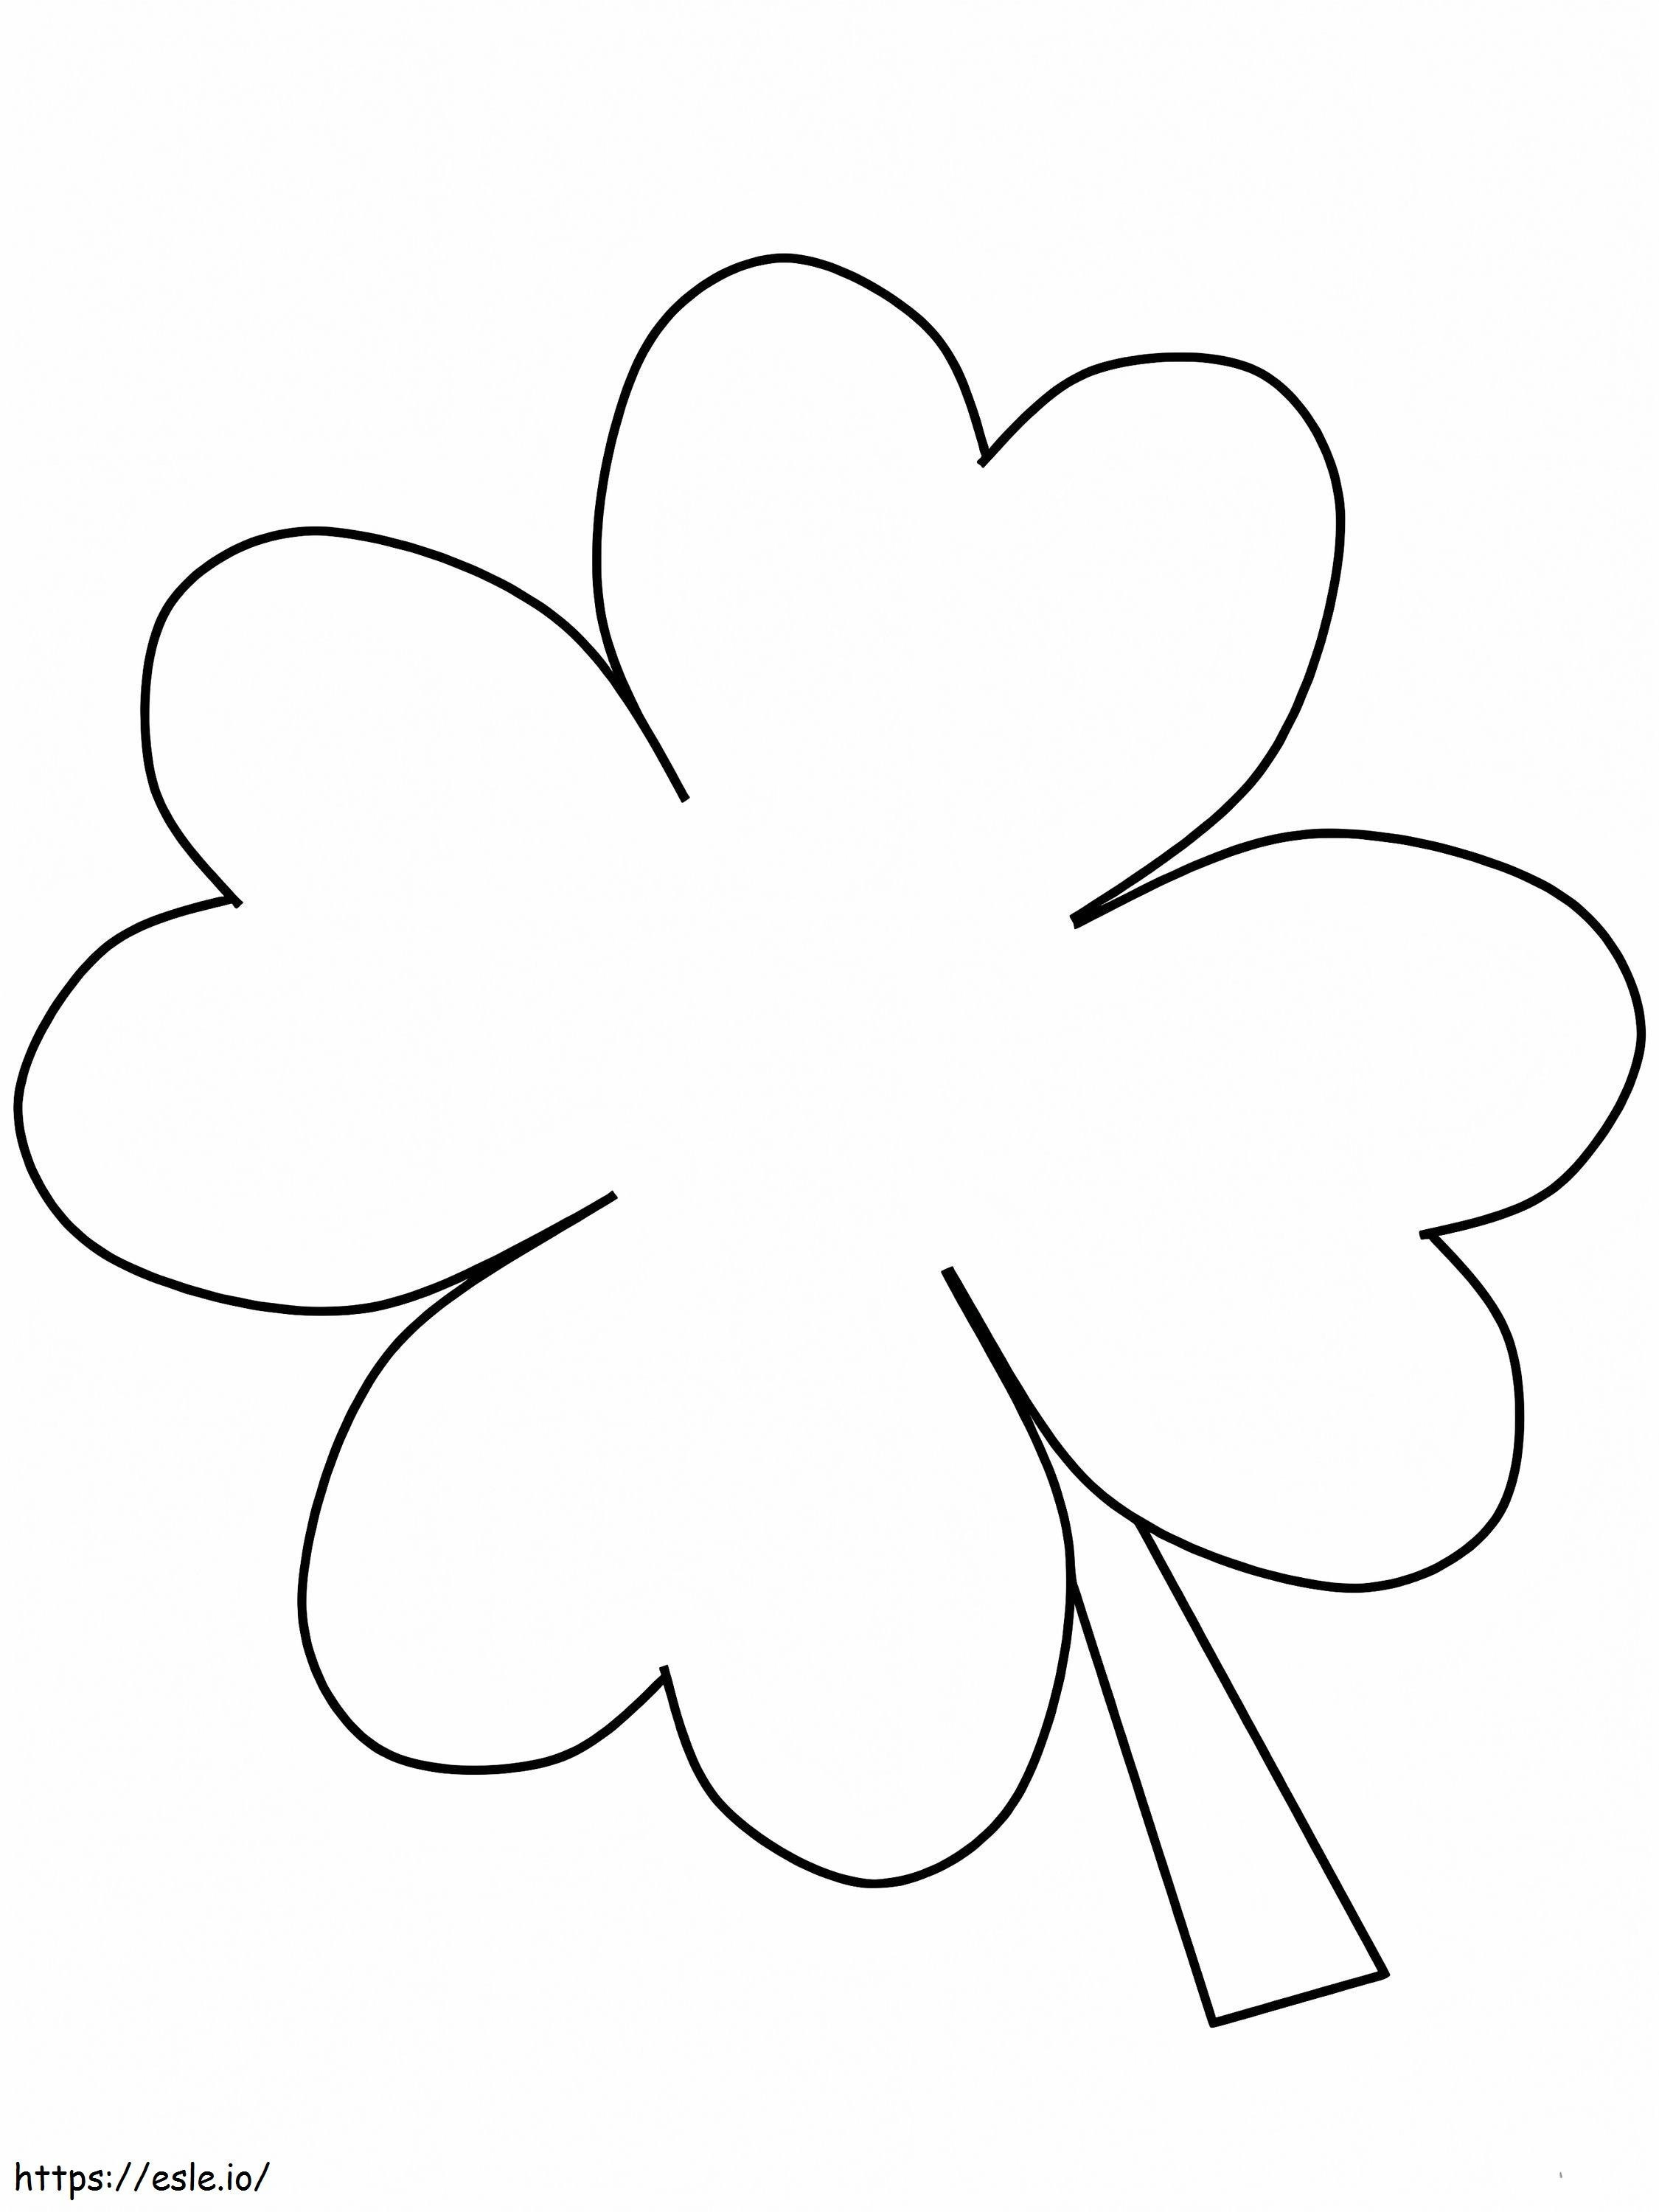 Printable Clover coloring page